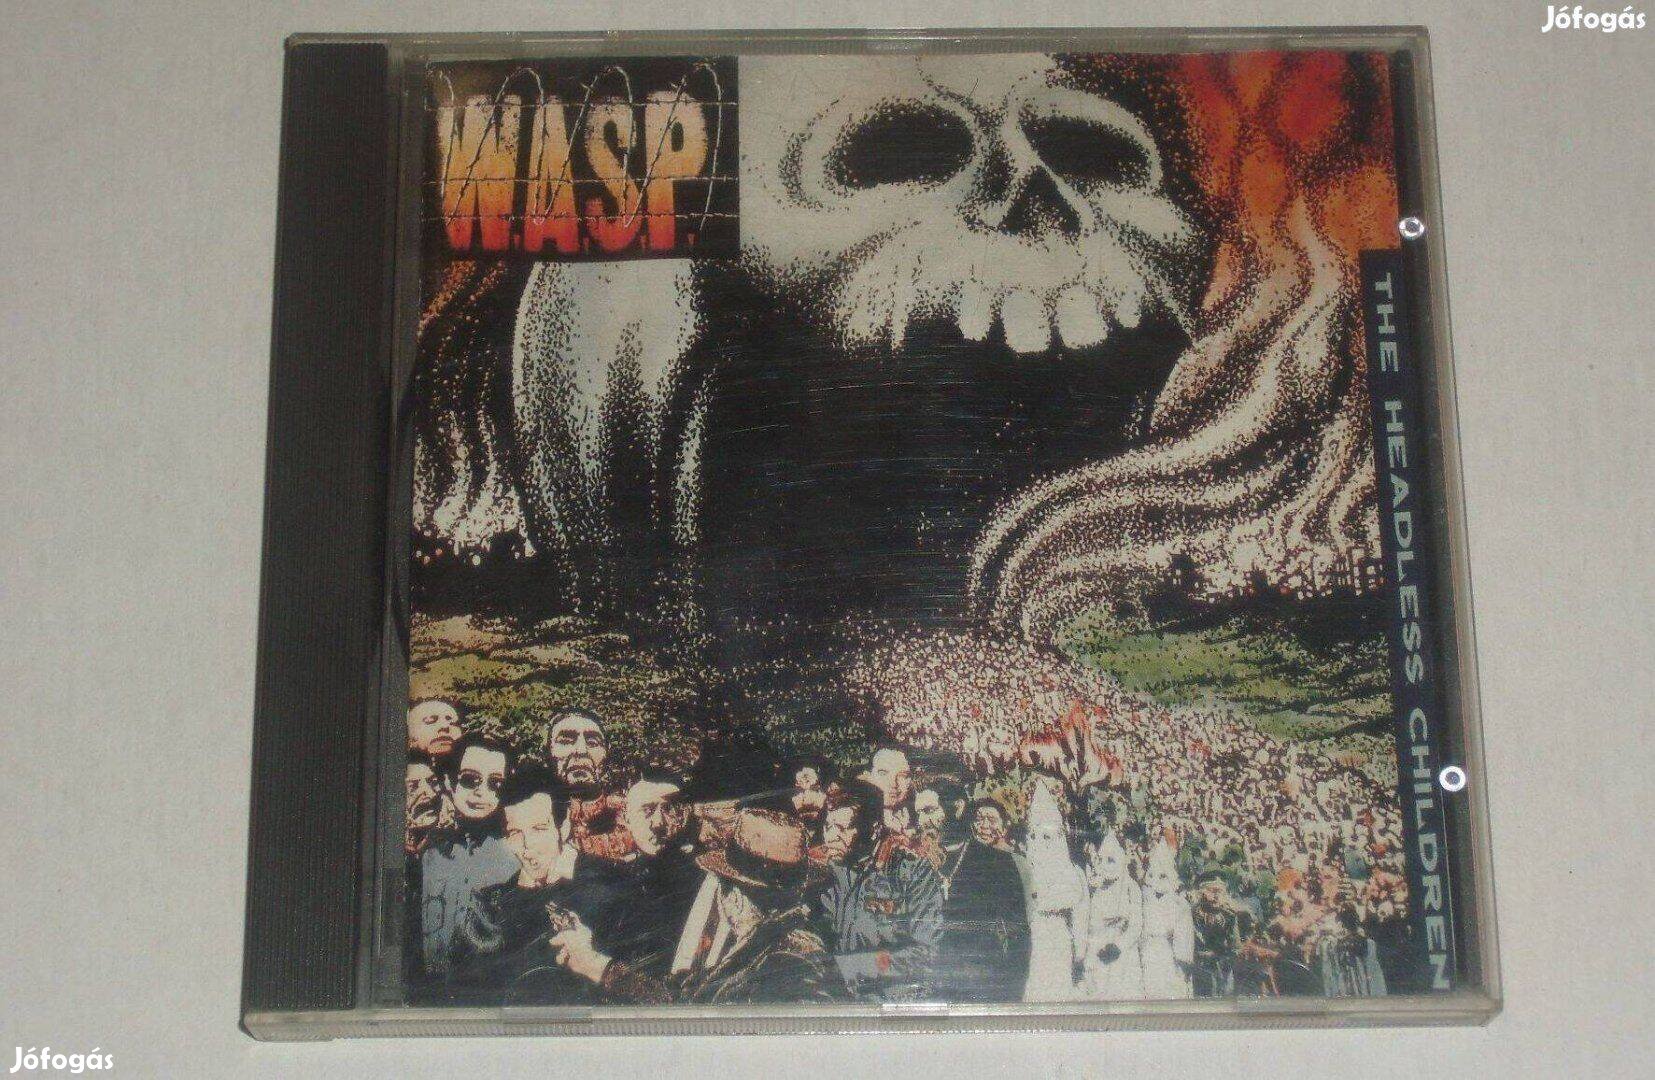 W.A.S.P. - The Headless Children CD 1989. Germany